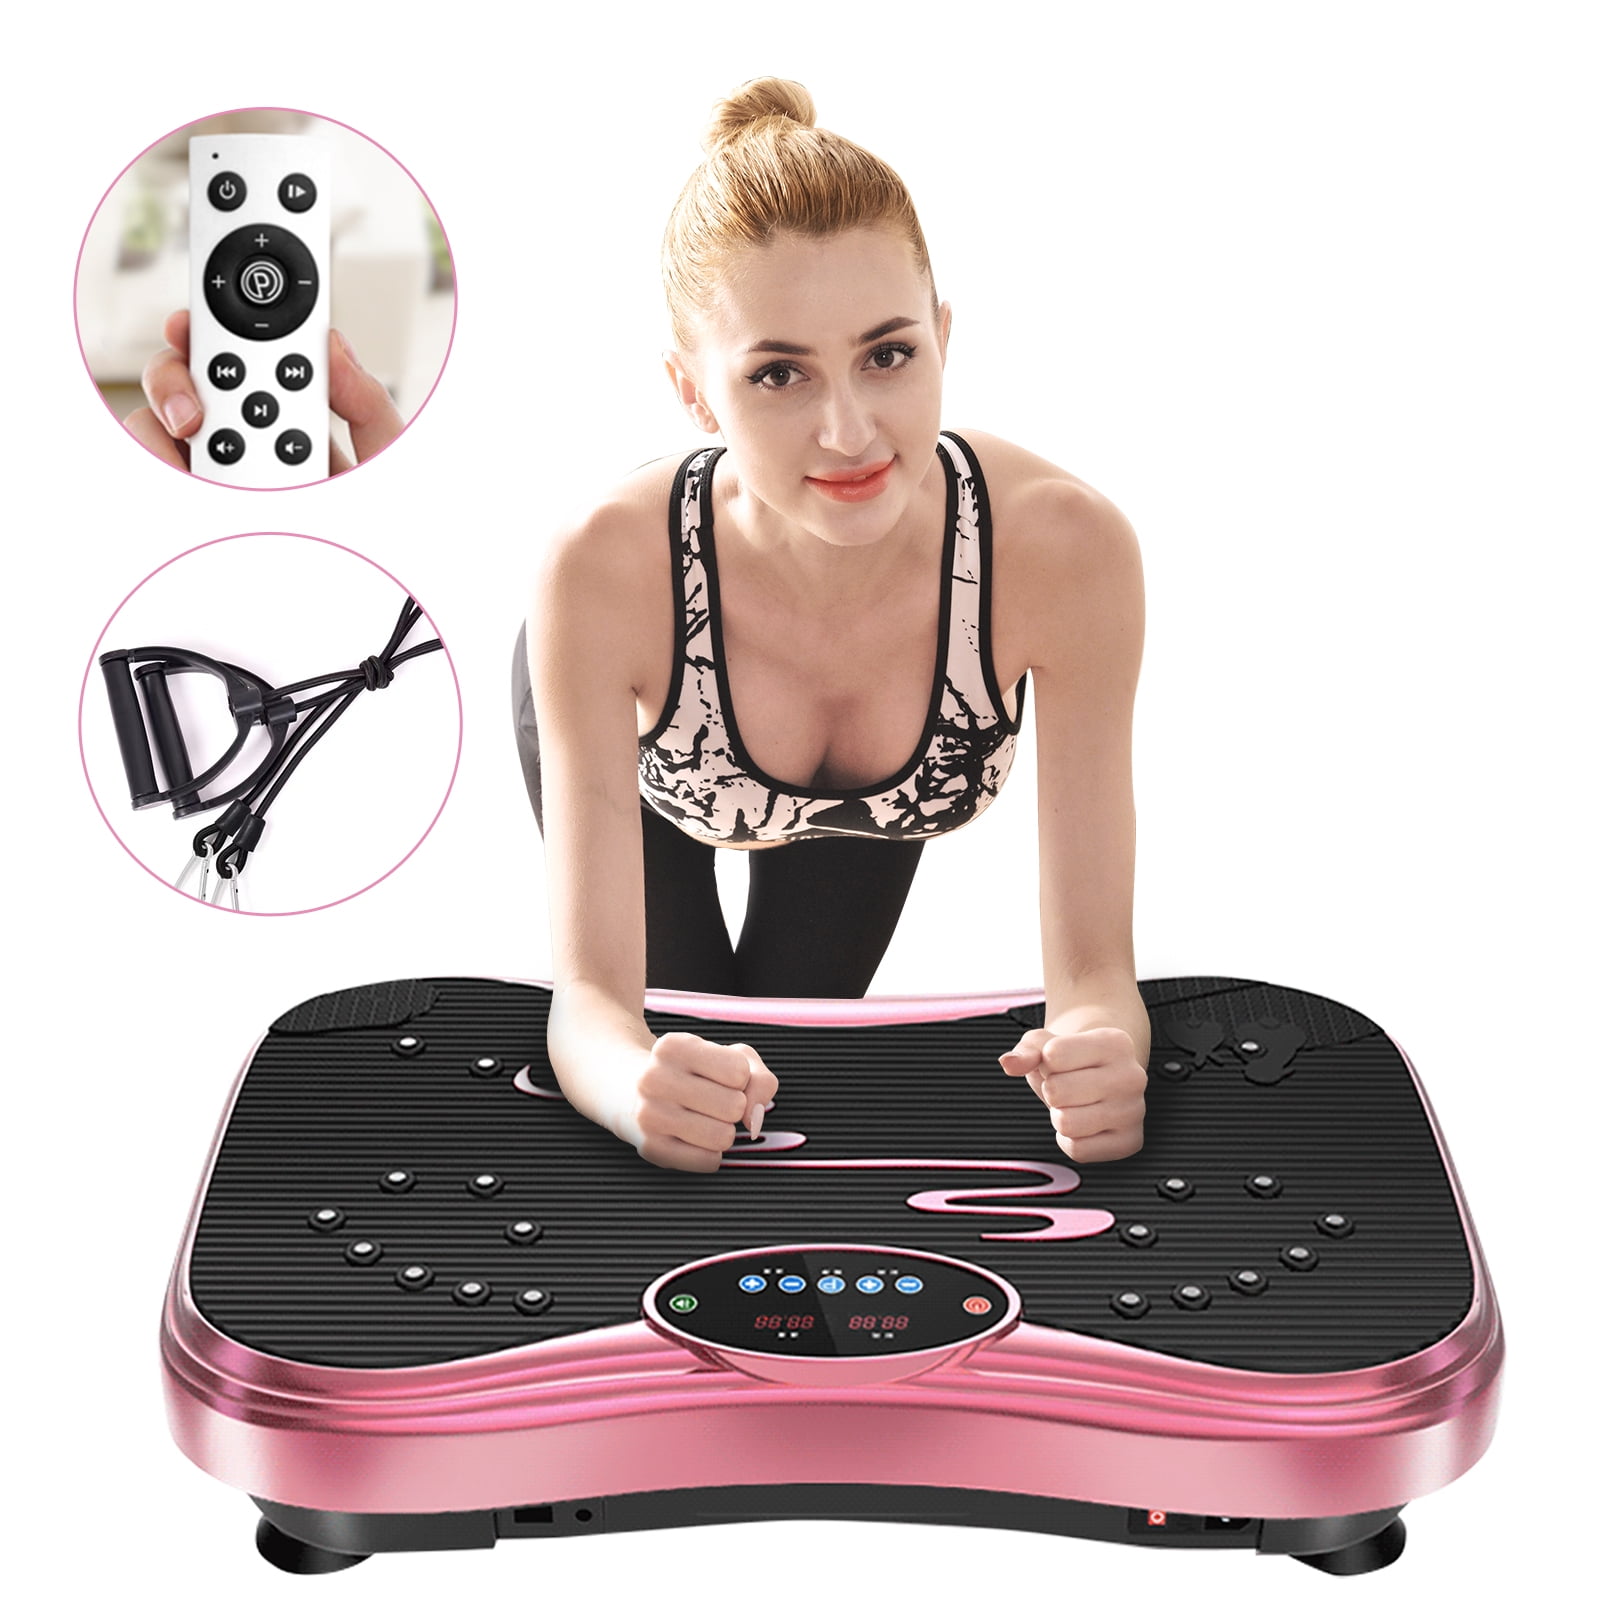 Pinty 2000W Whole Body Vibration Machine for sale online 